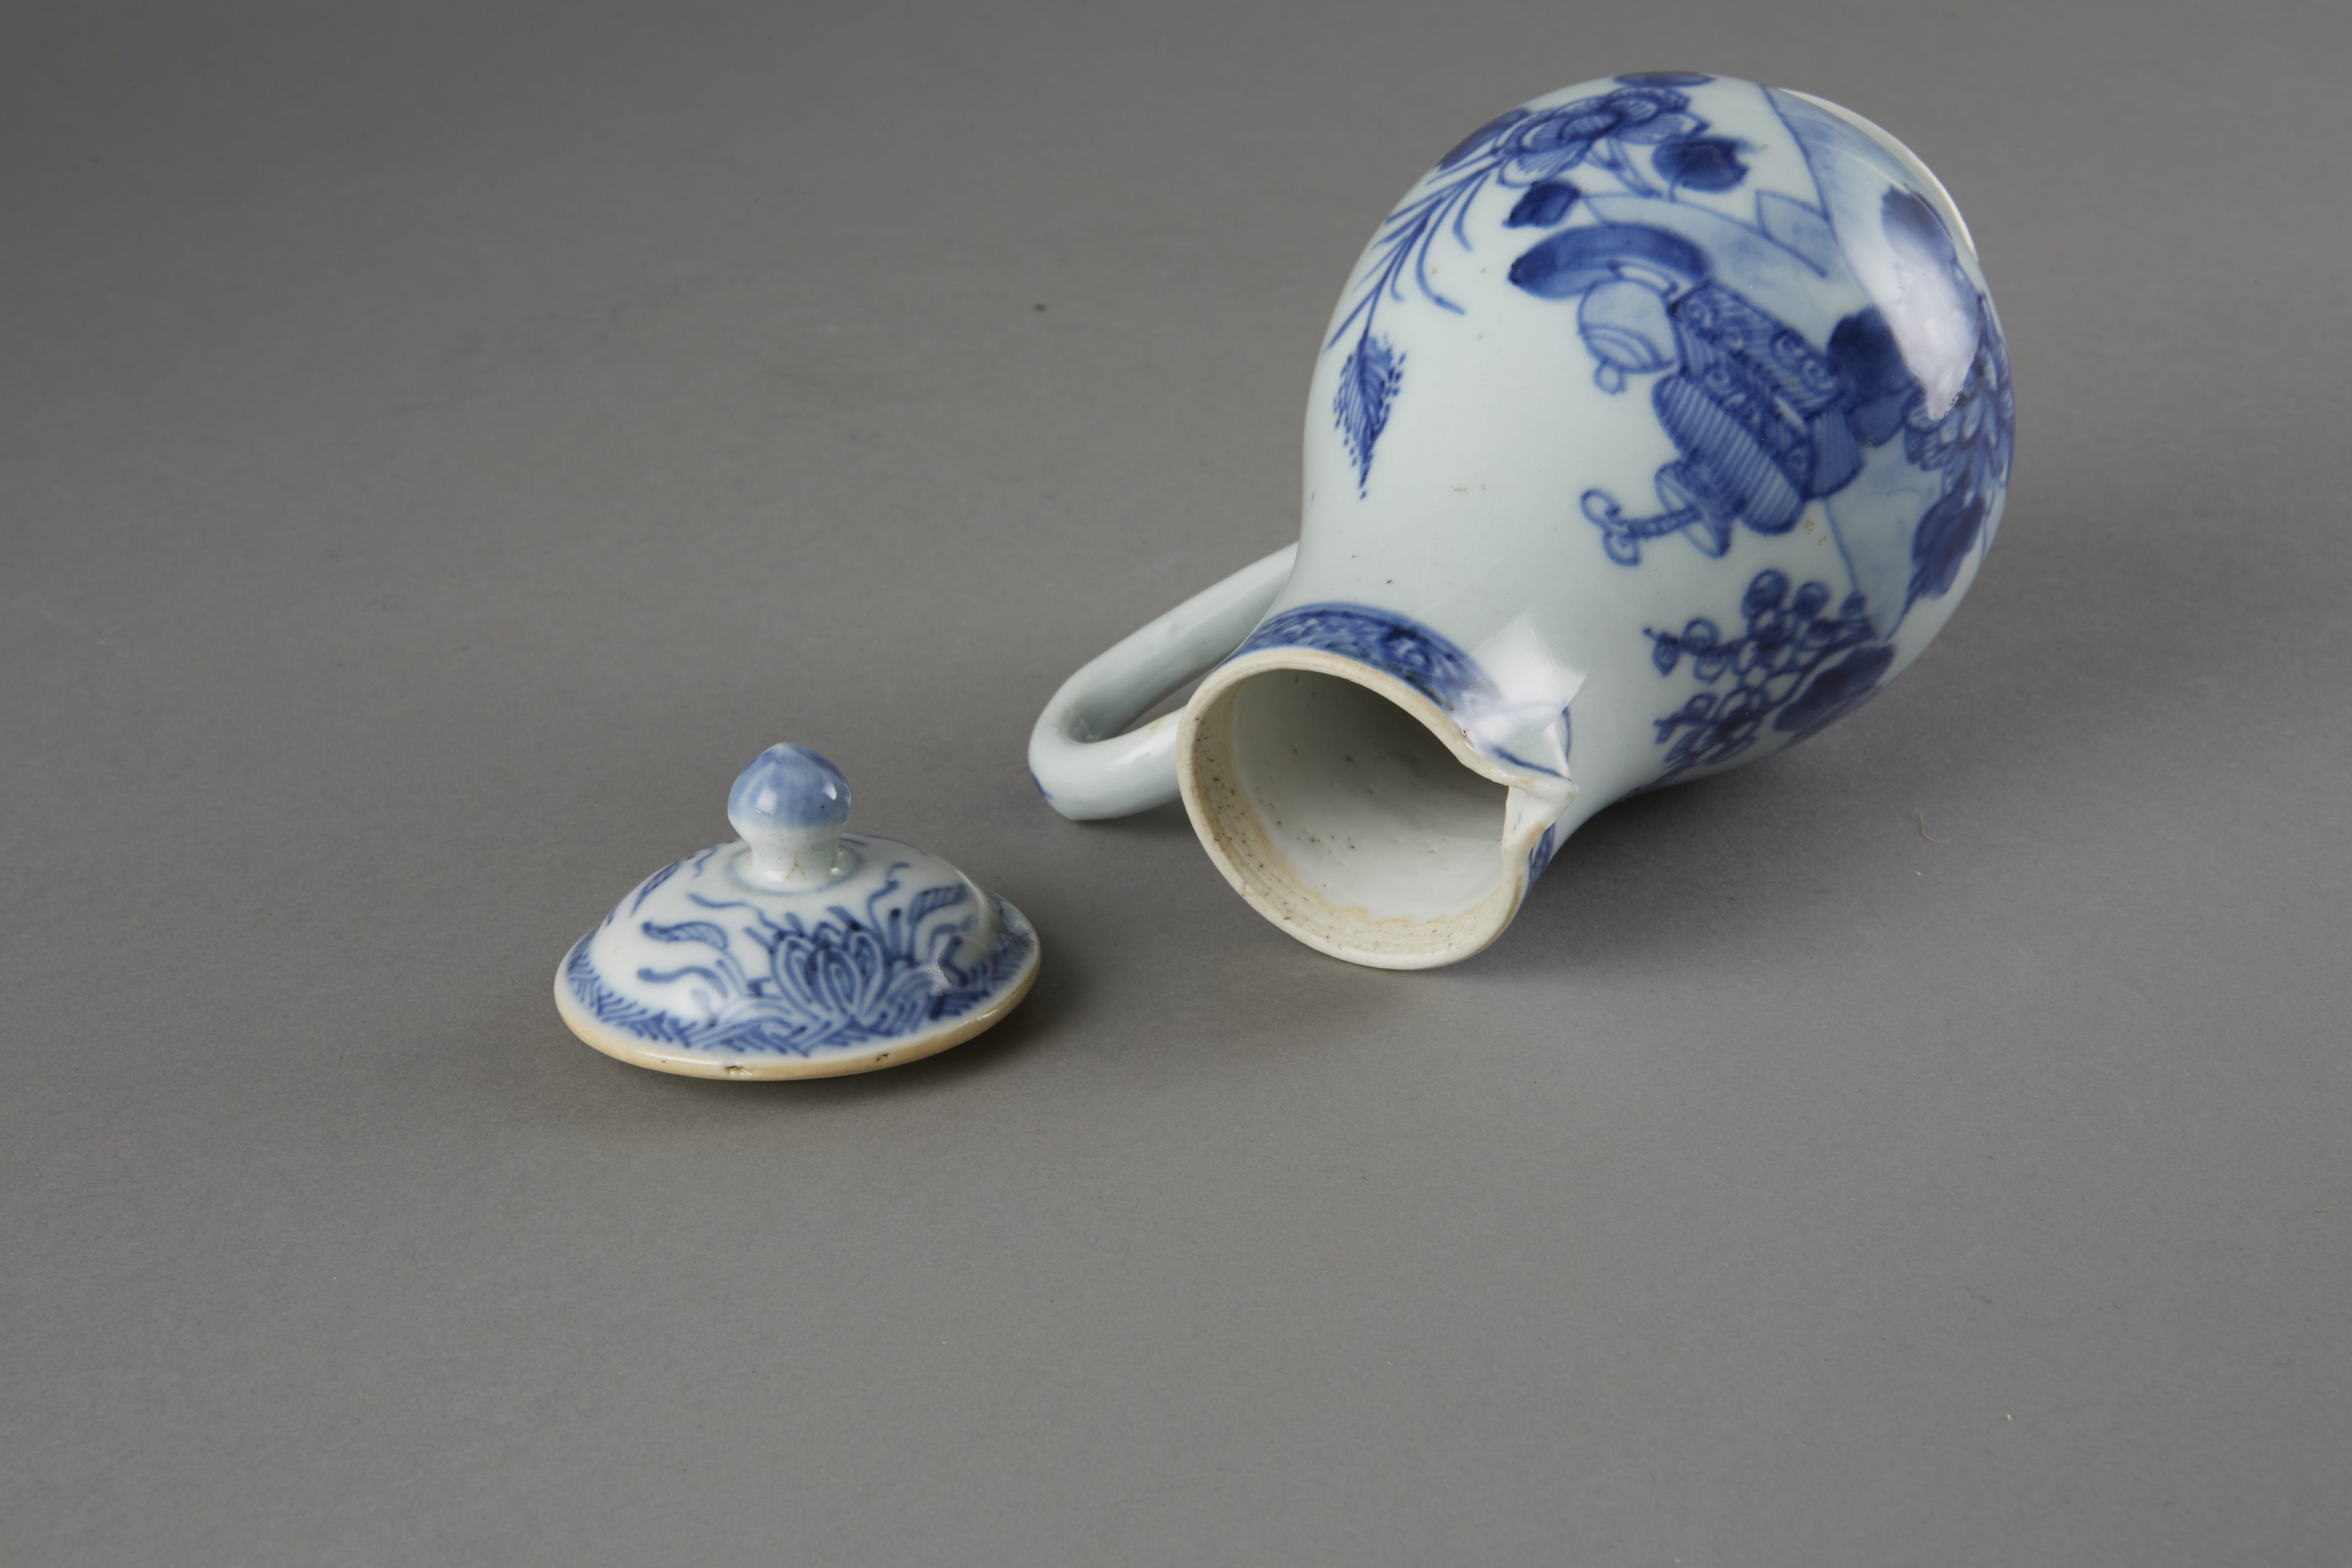 Lot 085: Chinese 18th Century Kangxi Blue and White Export Porcelain Creamer with Lid